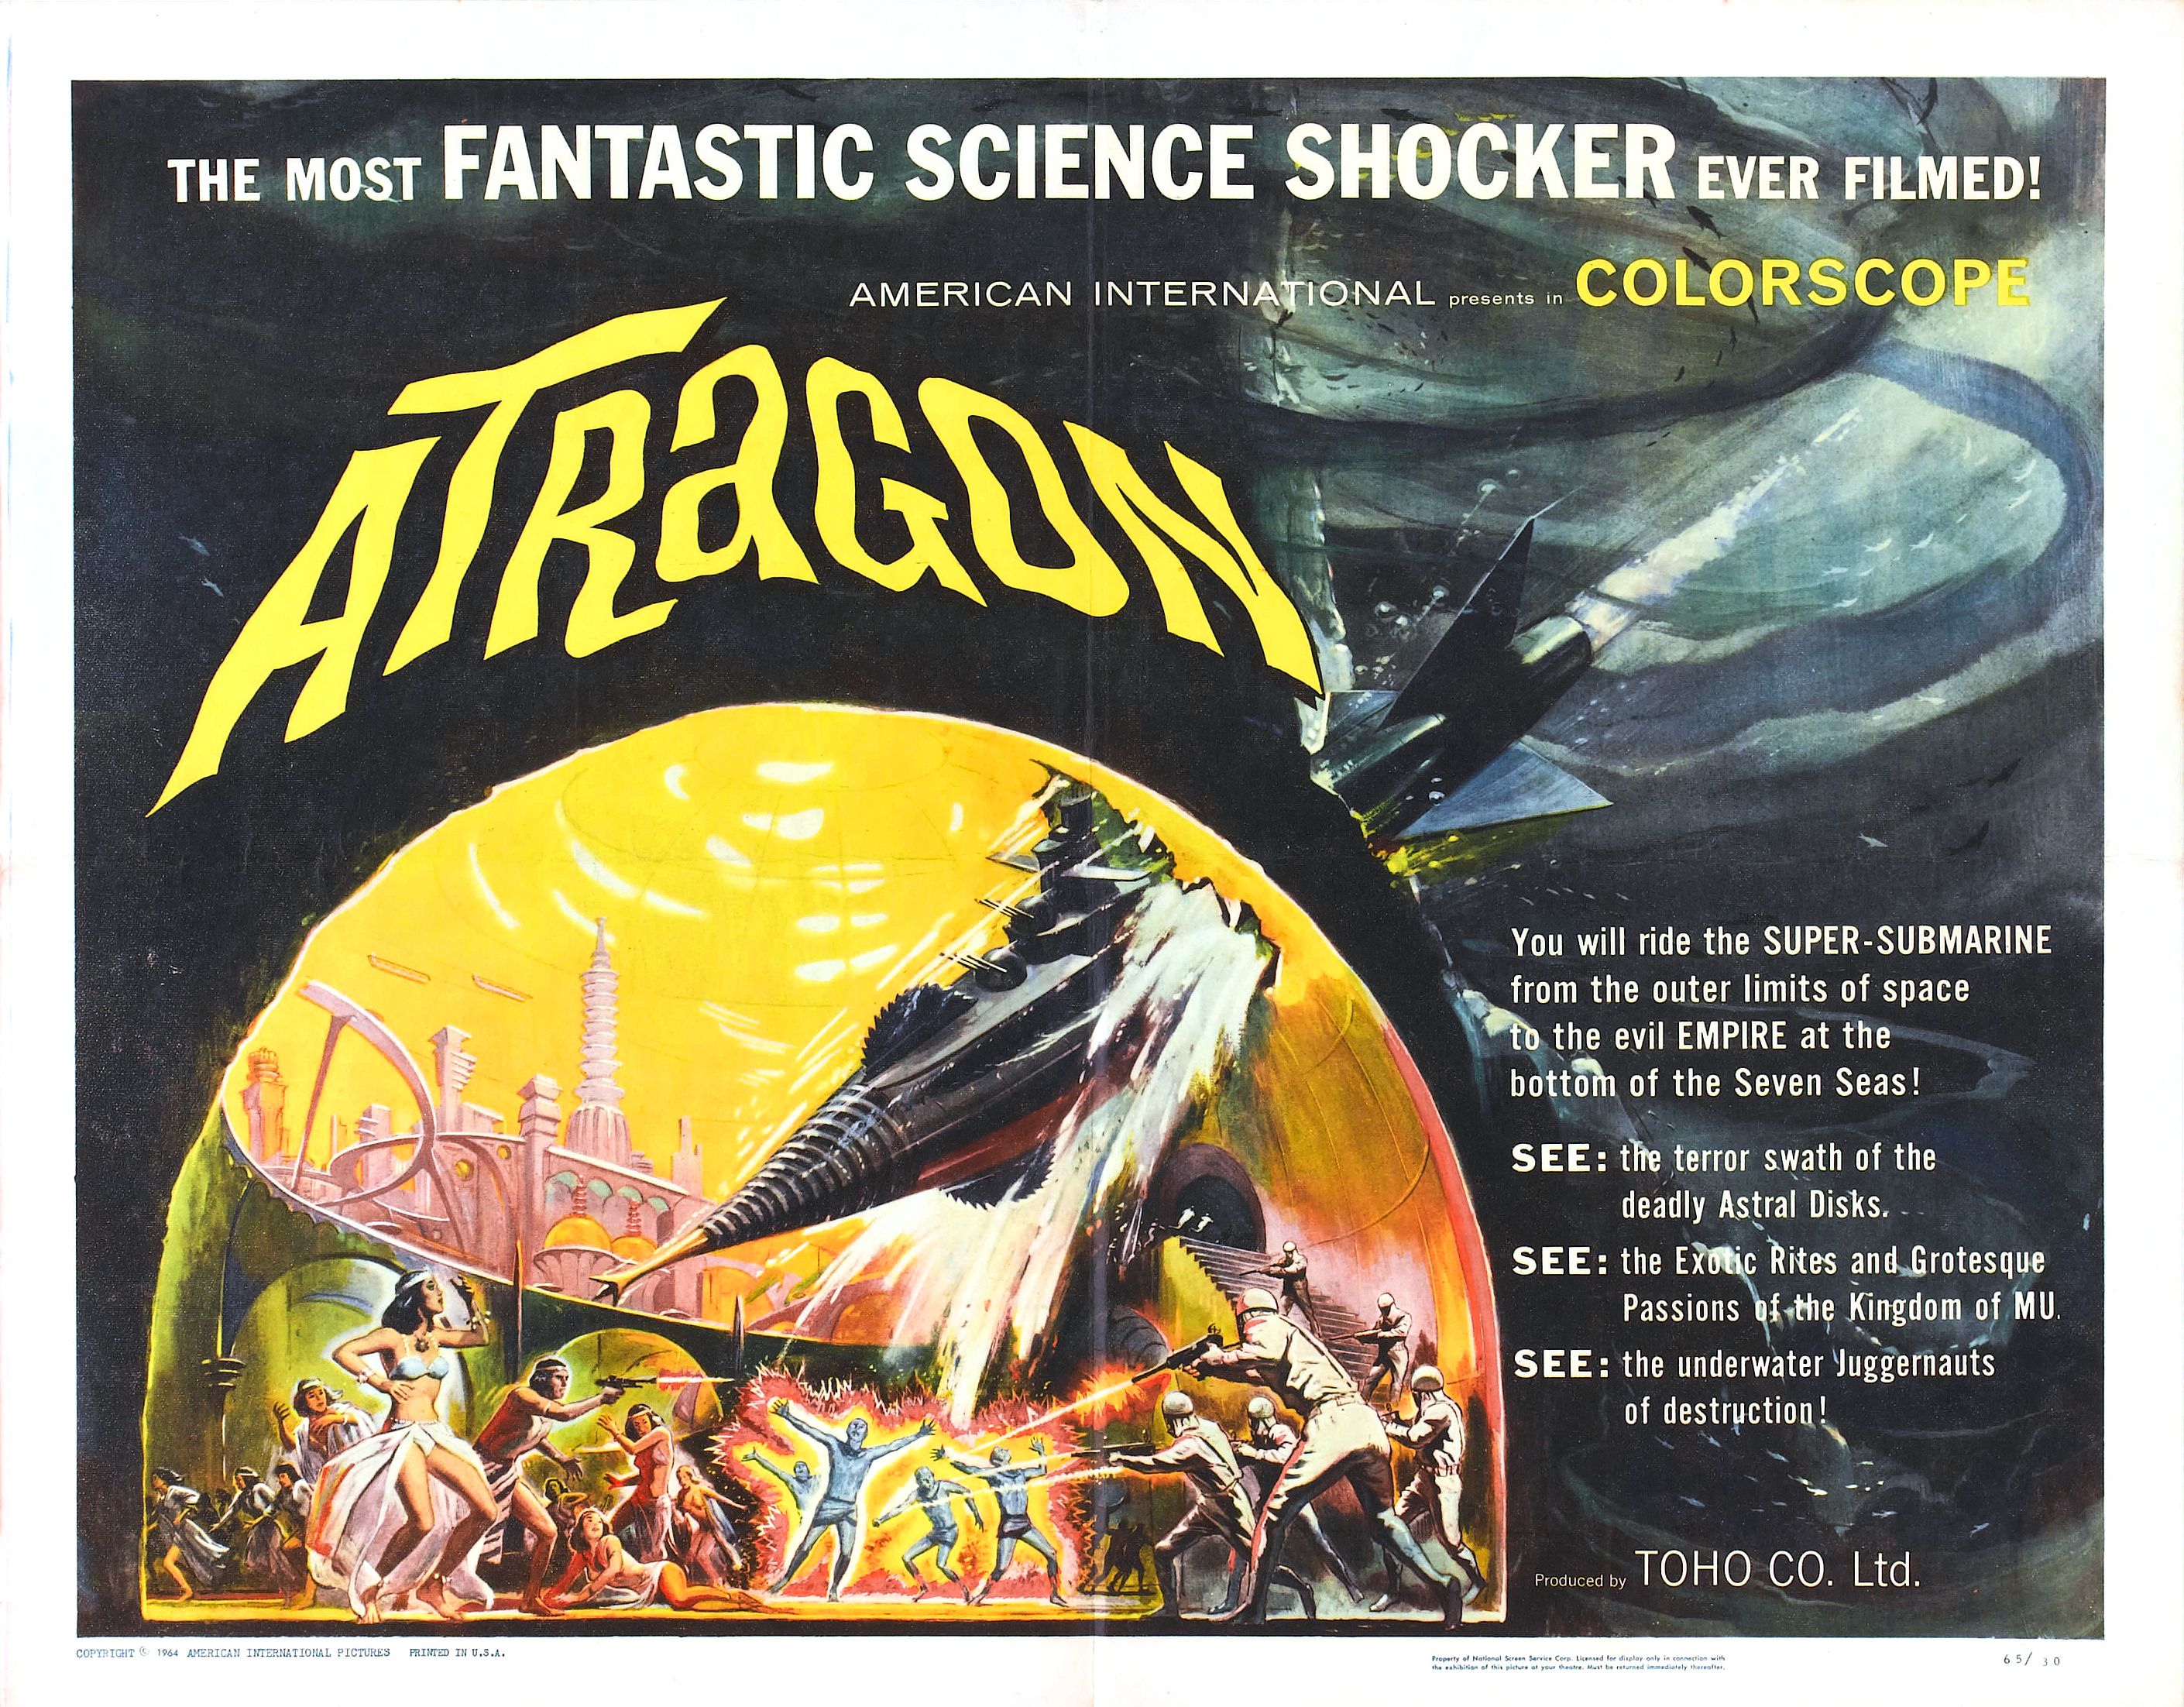 atragon 1963 - The Most Fantastic Science Shocker Ever Filmed American International. Colorscope Aragd You will ride the SuperSubmarine from the outer limits of space to the evil Empire at the bottom of the Seven Seas! See the terror swath of the deadly A